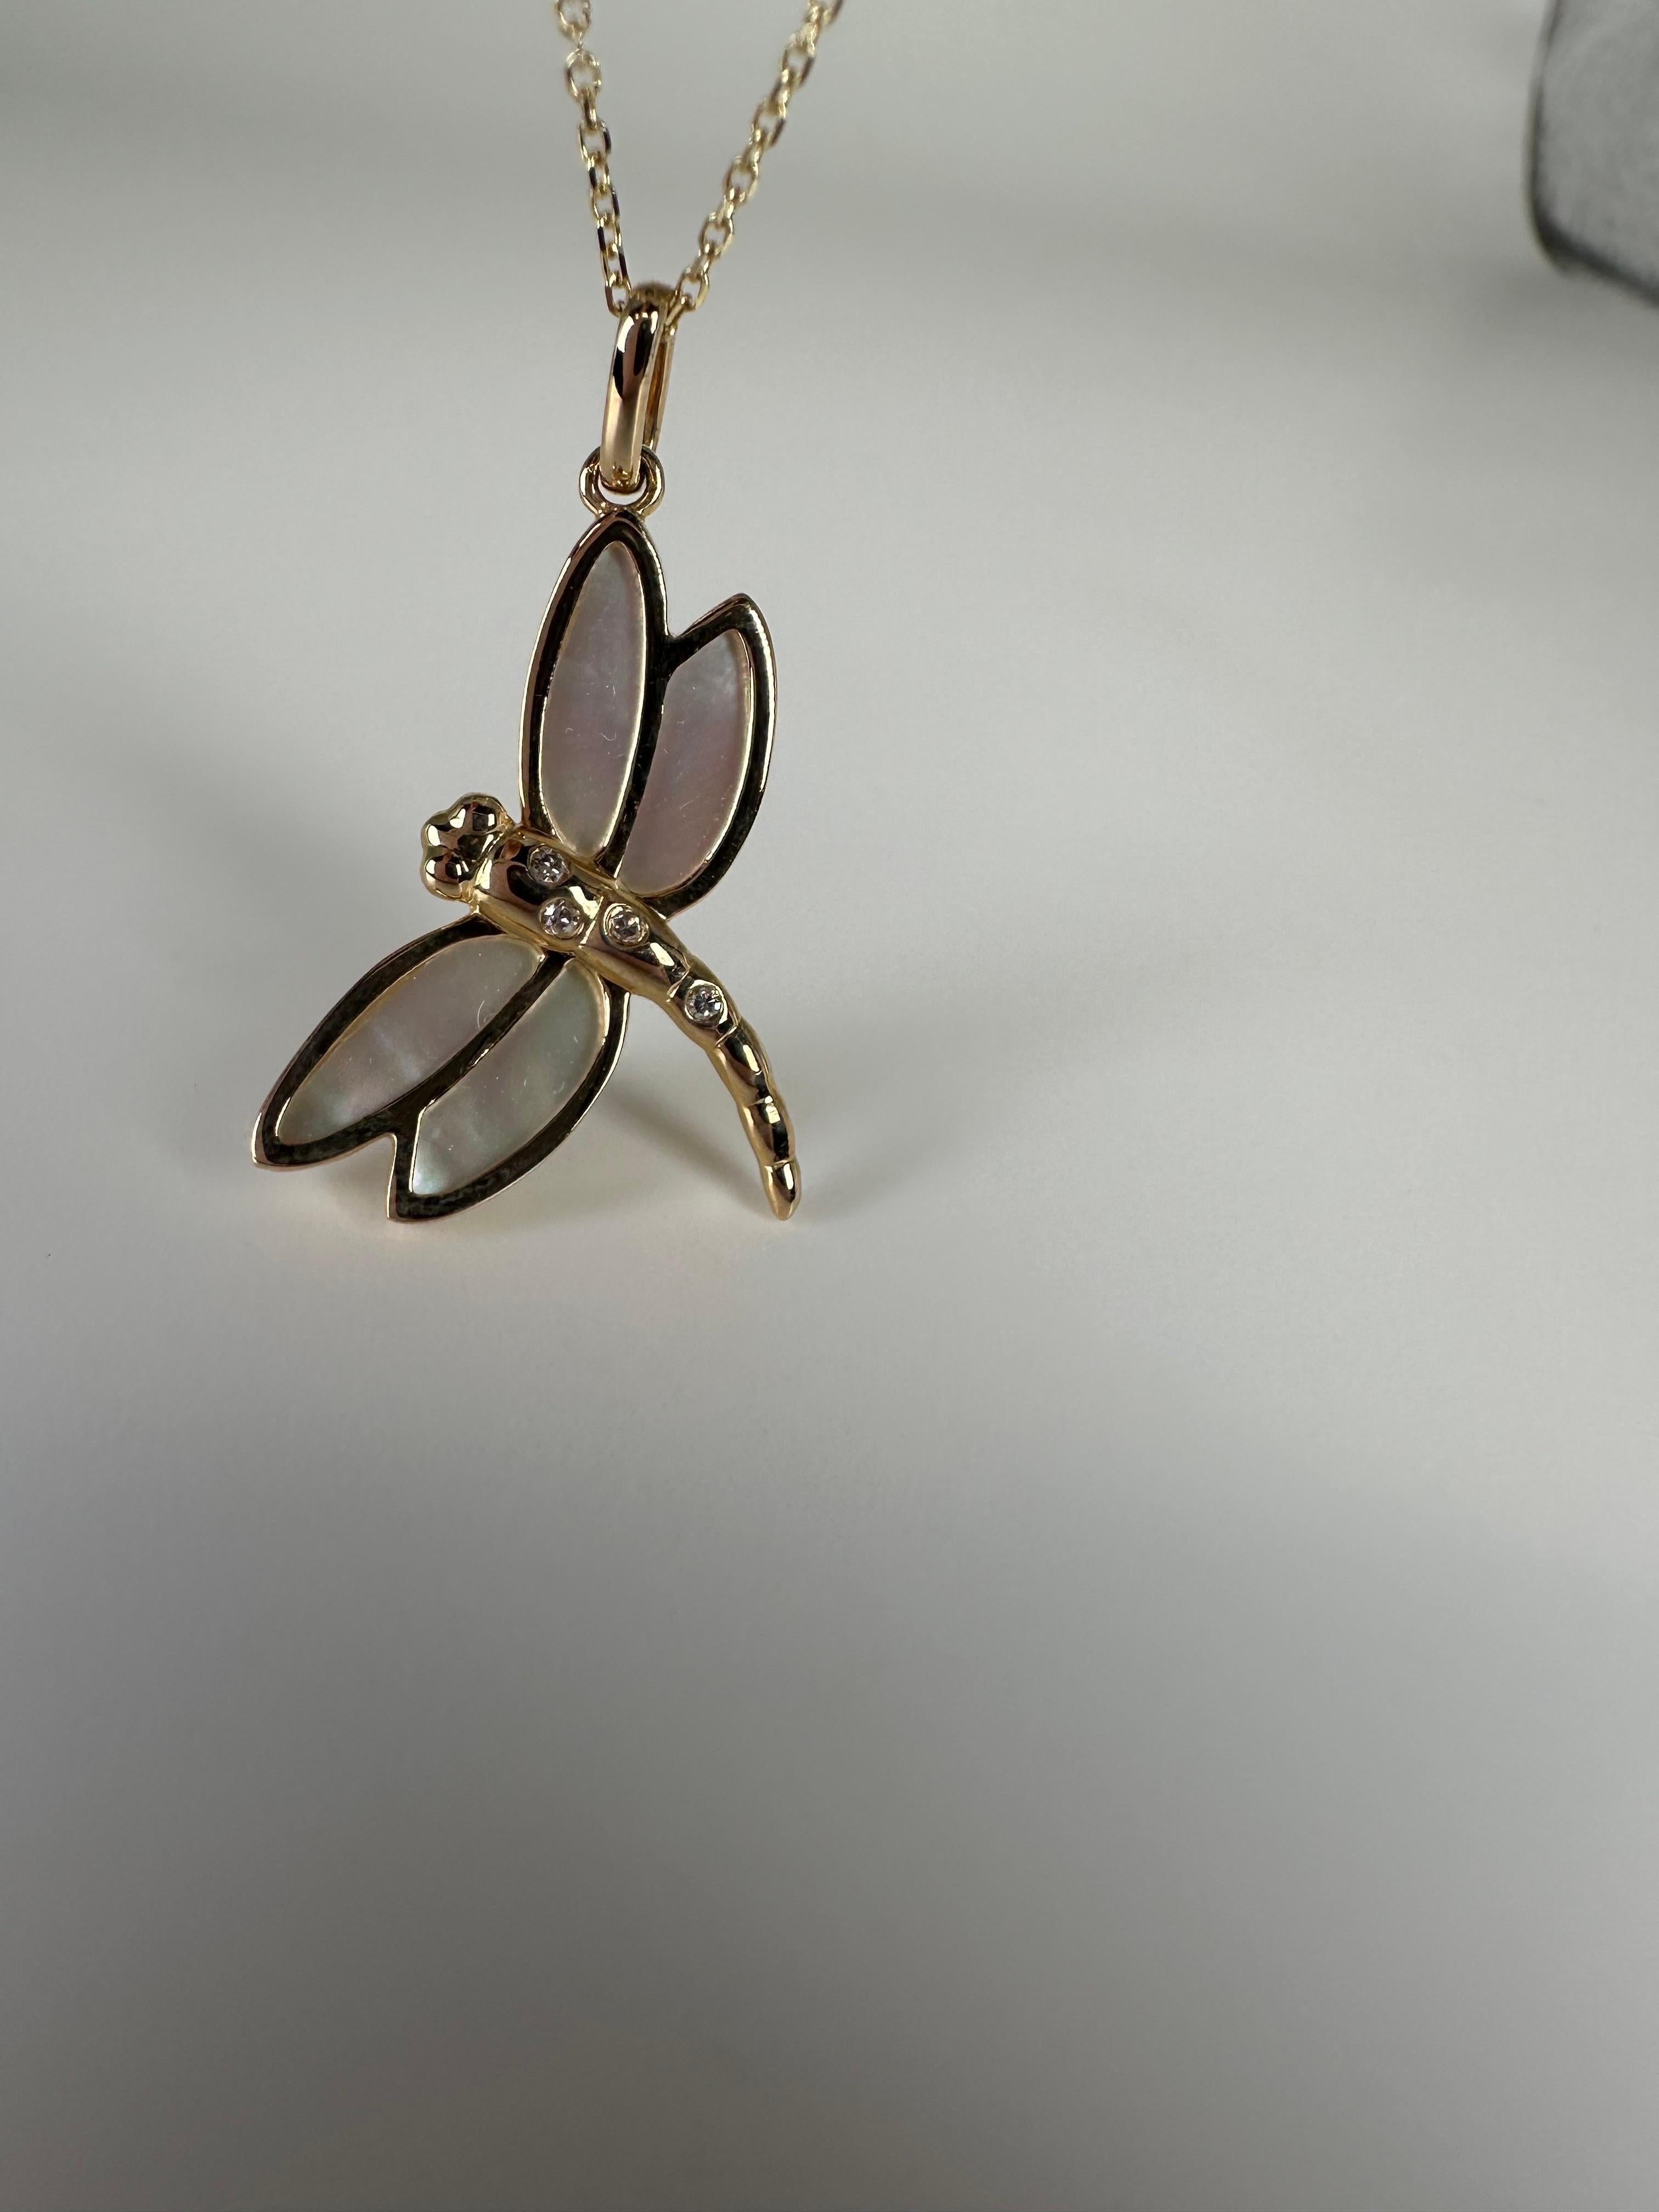 Stunning dragonfly in 14Kt gold made with diamonds and enamel art! Chain is 18